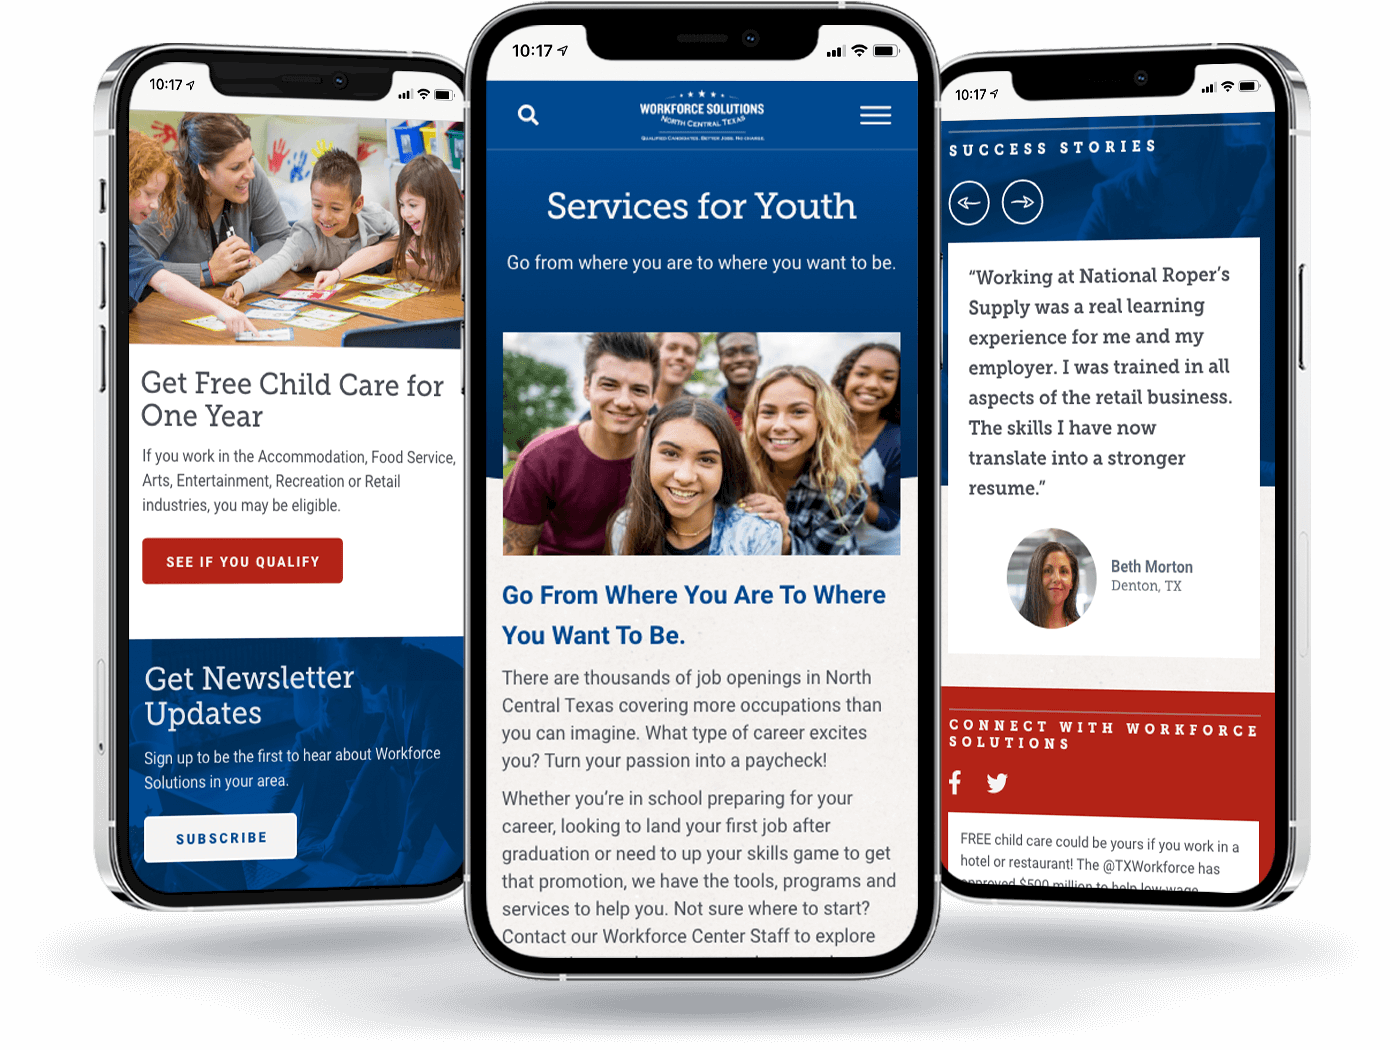 Iphone view of CTA, Services for Youth, and testimonials 